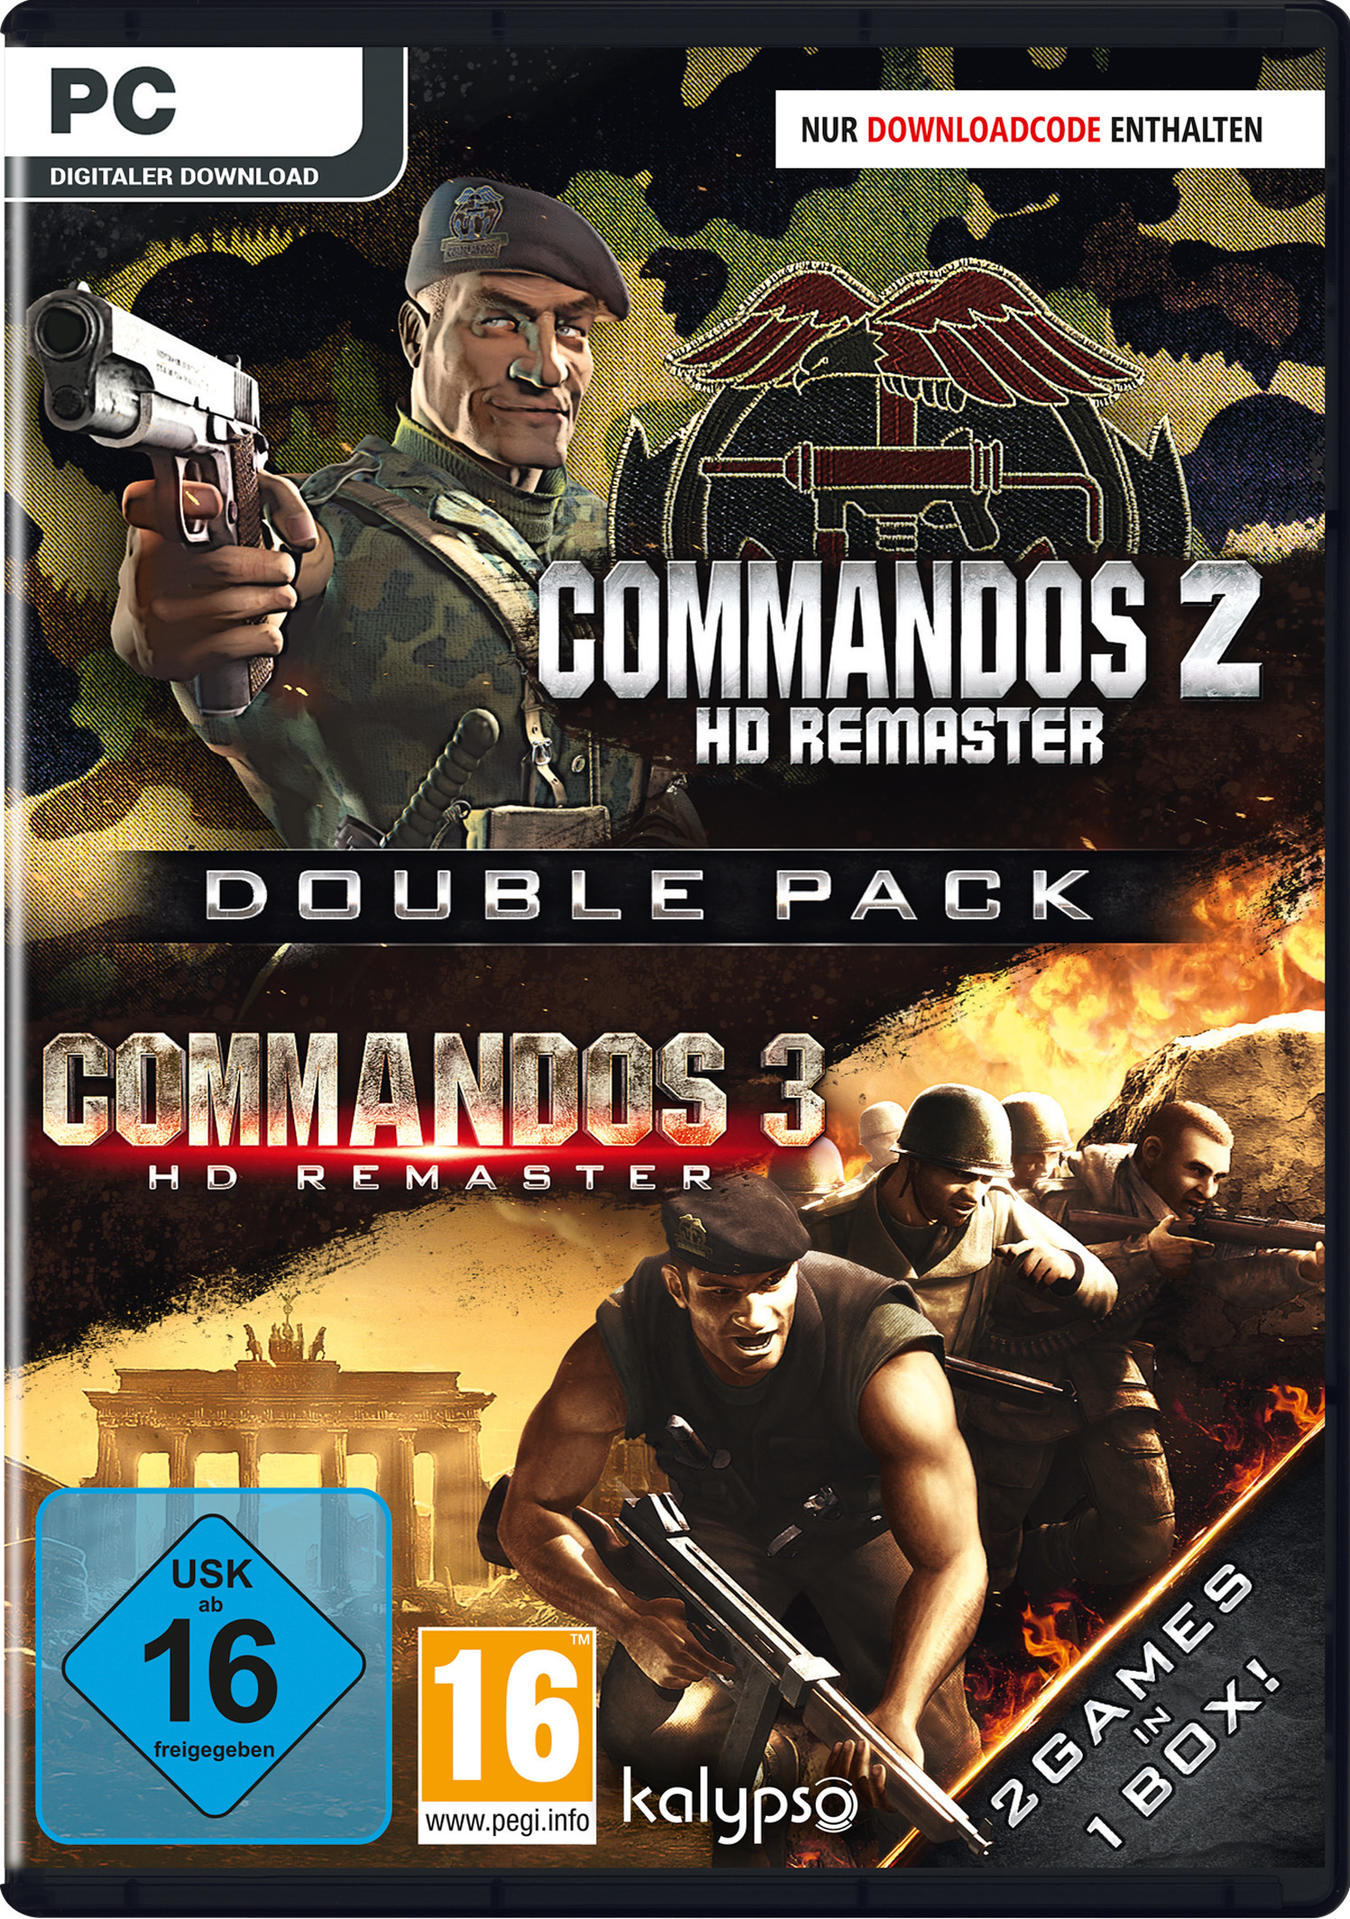 COMMANDOS 2&3 (HD REMASTER DOUBLE - PACK) [PC